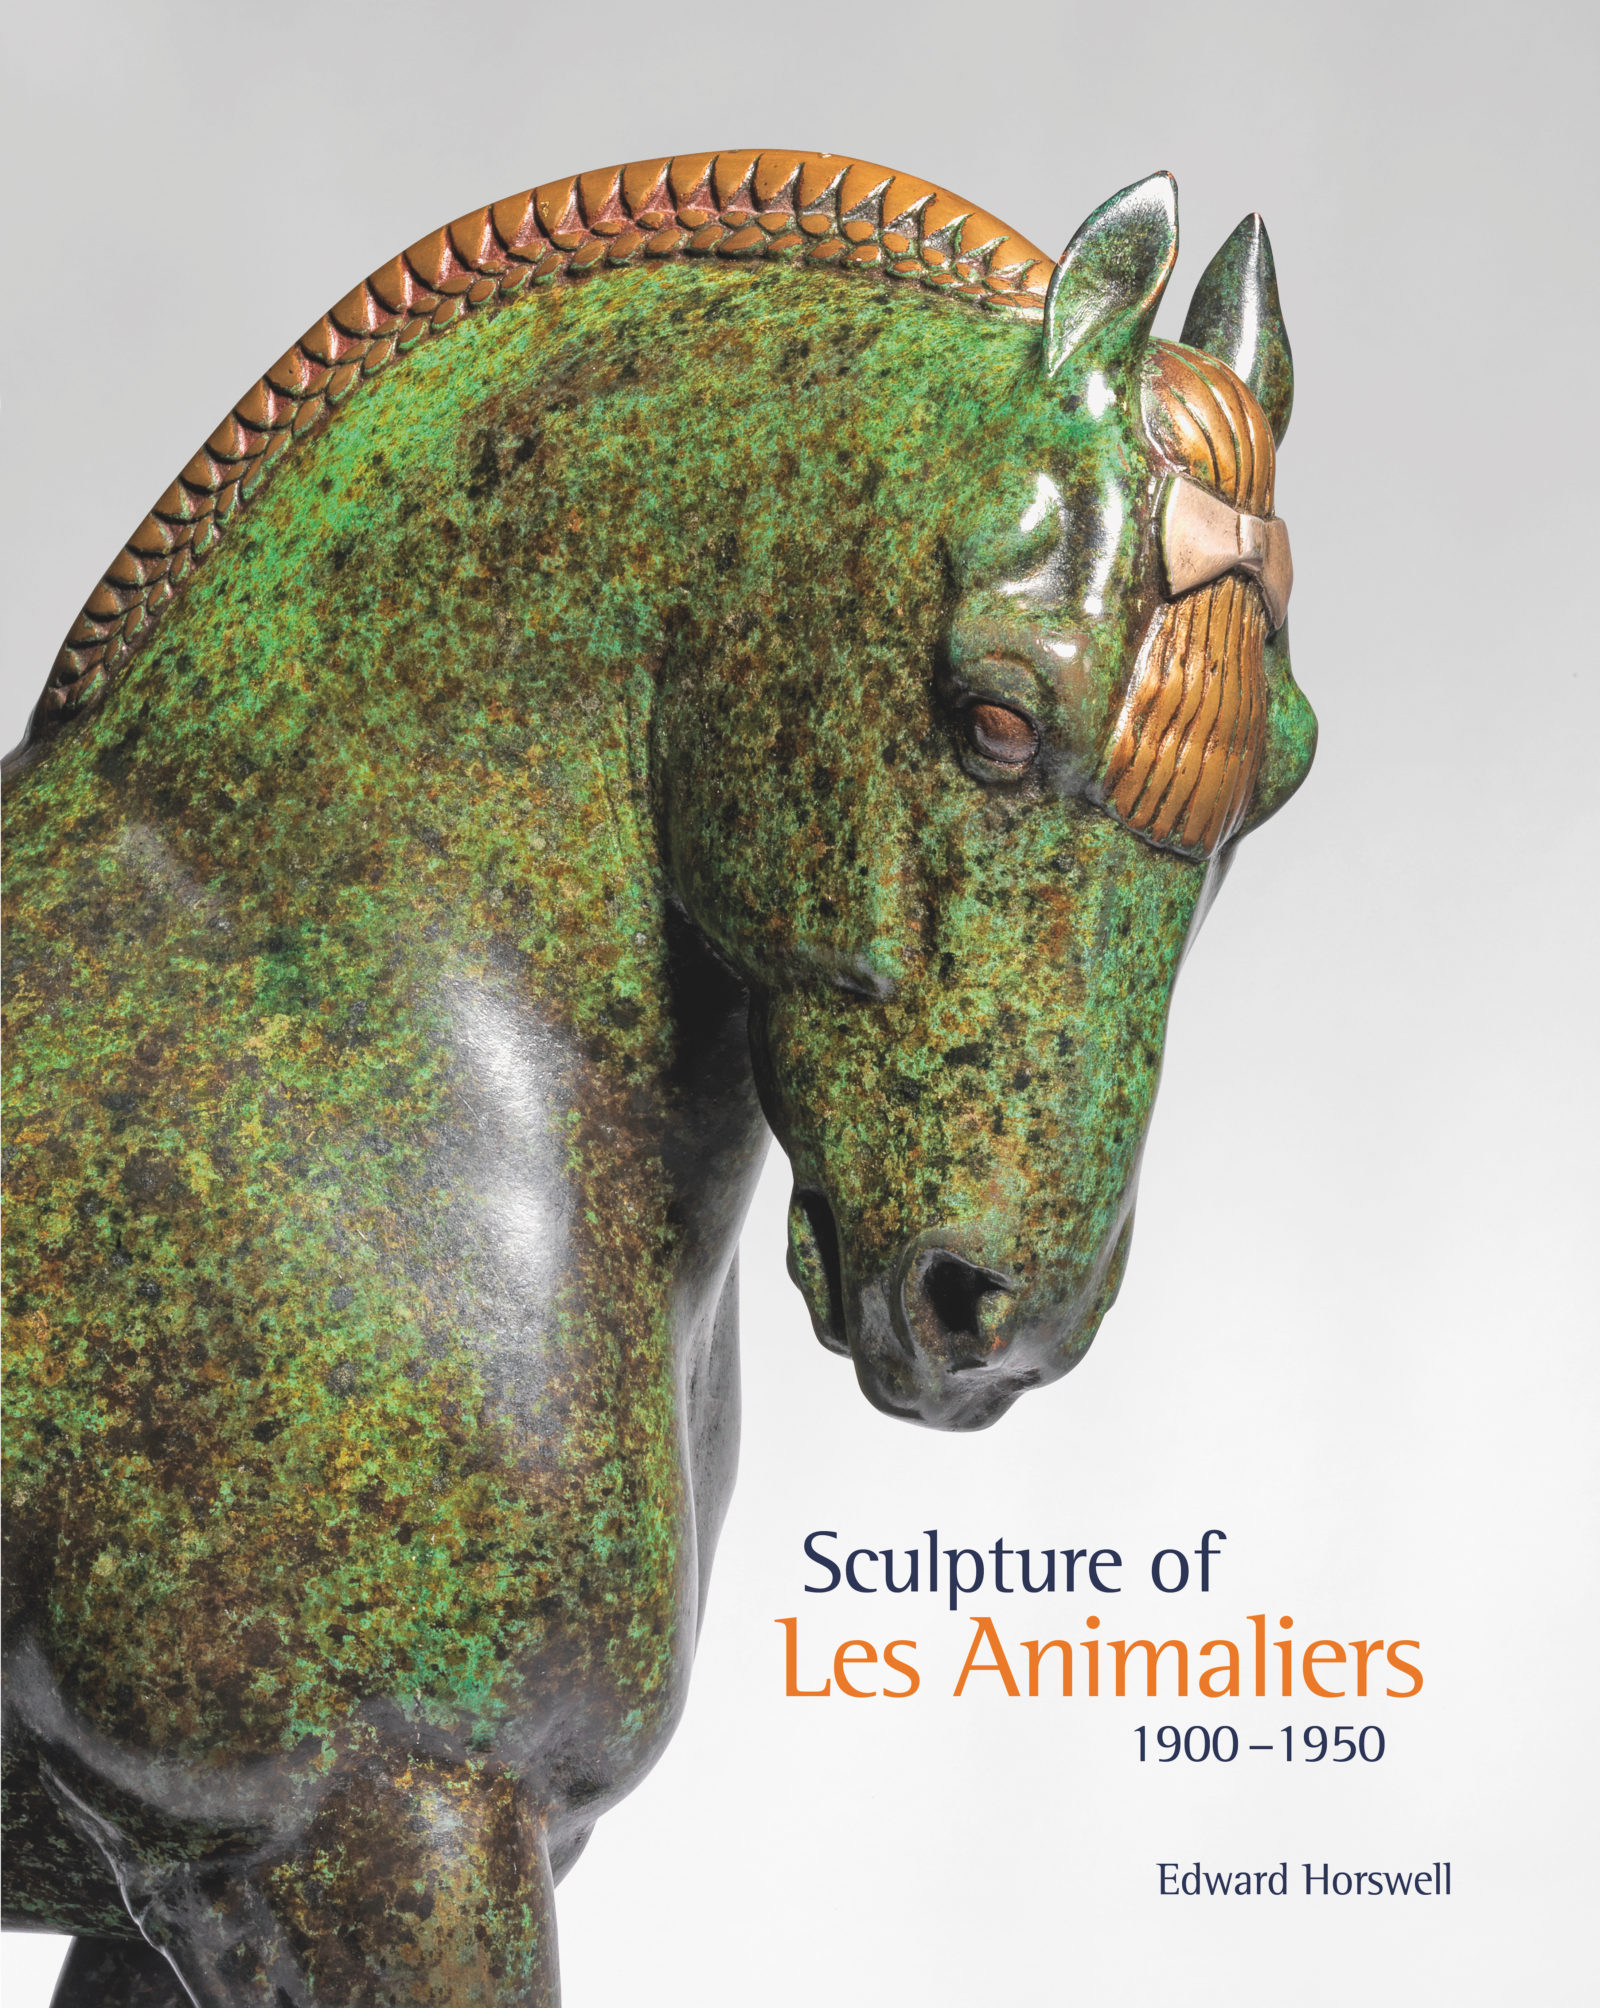 Les Animaliers 1900 to 1950